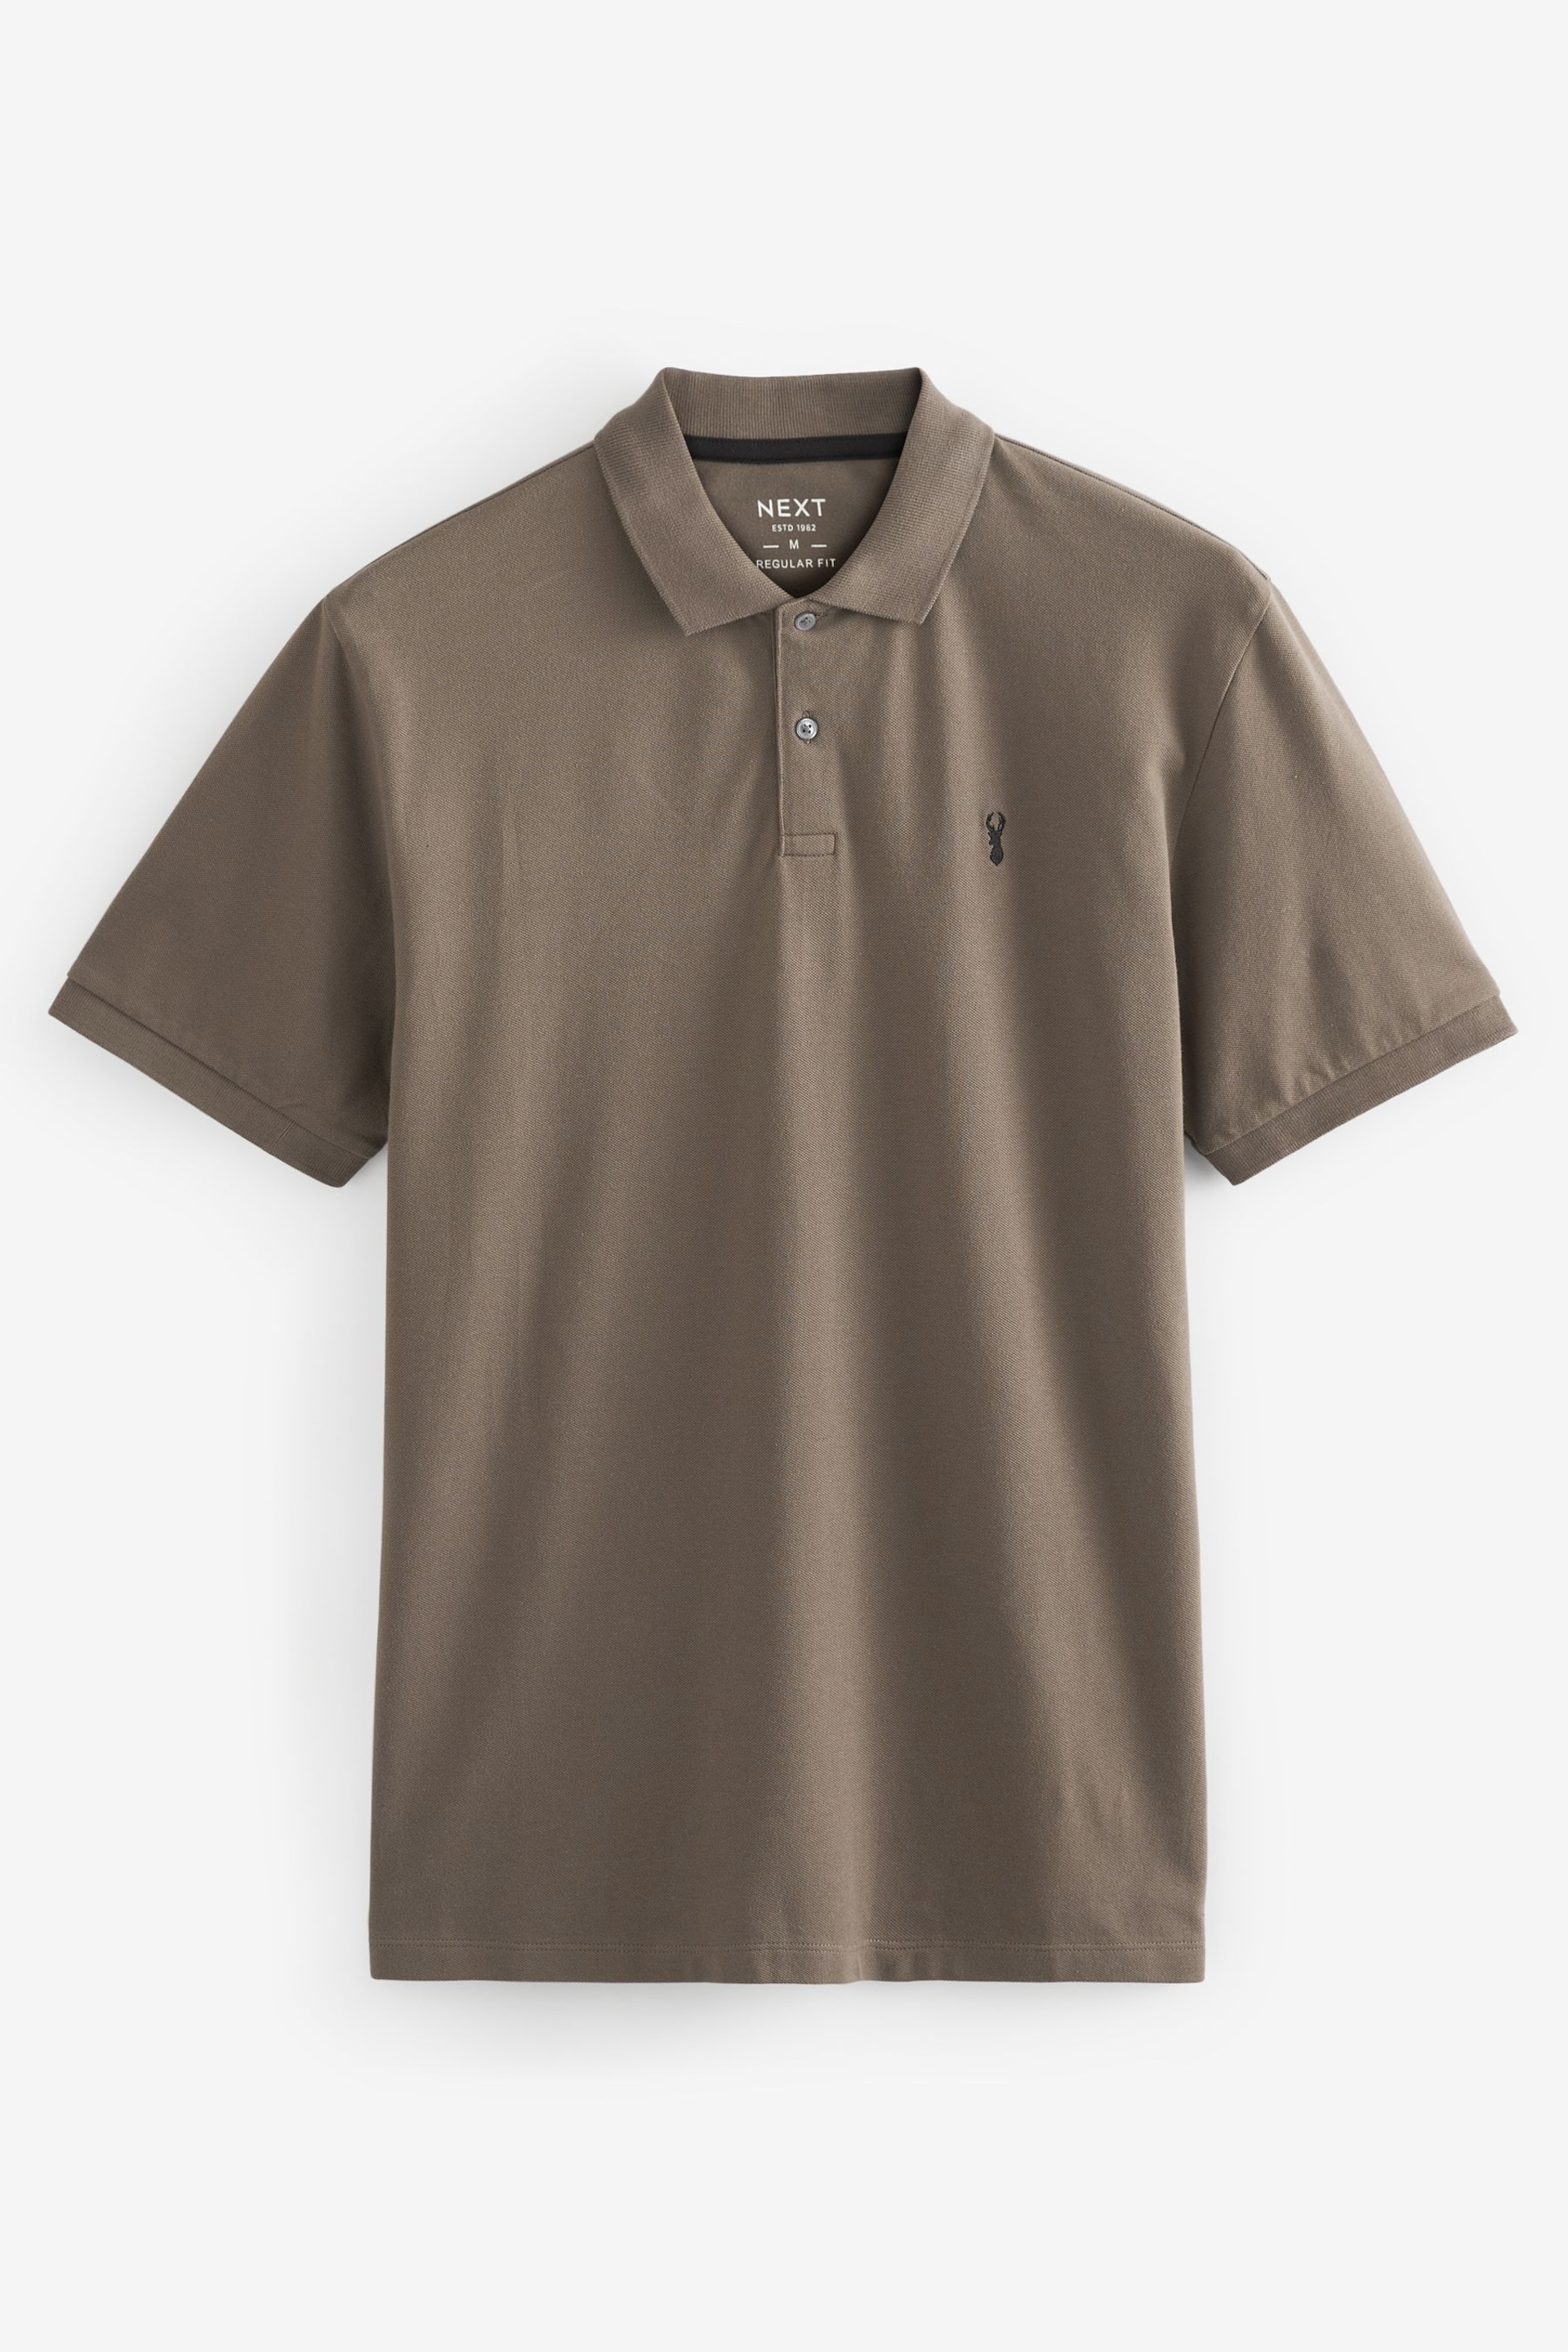 Brown Regular Fit Short Sleeve Pique Polo Shirt - Image 6 of 7